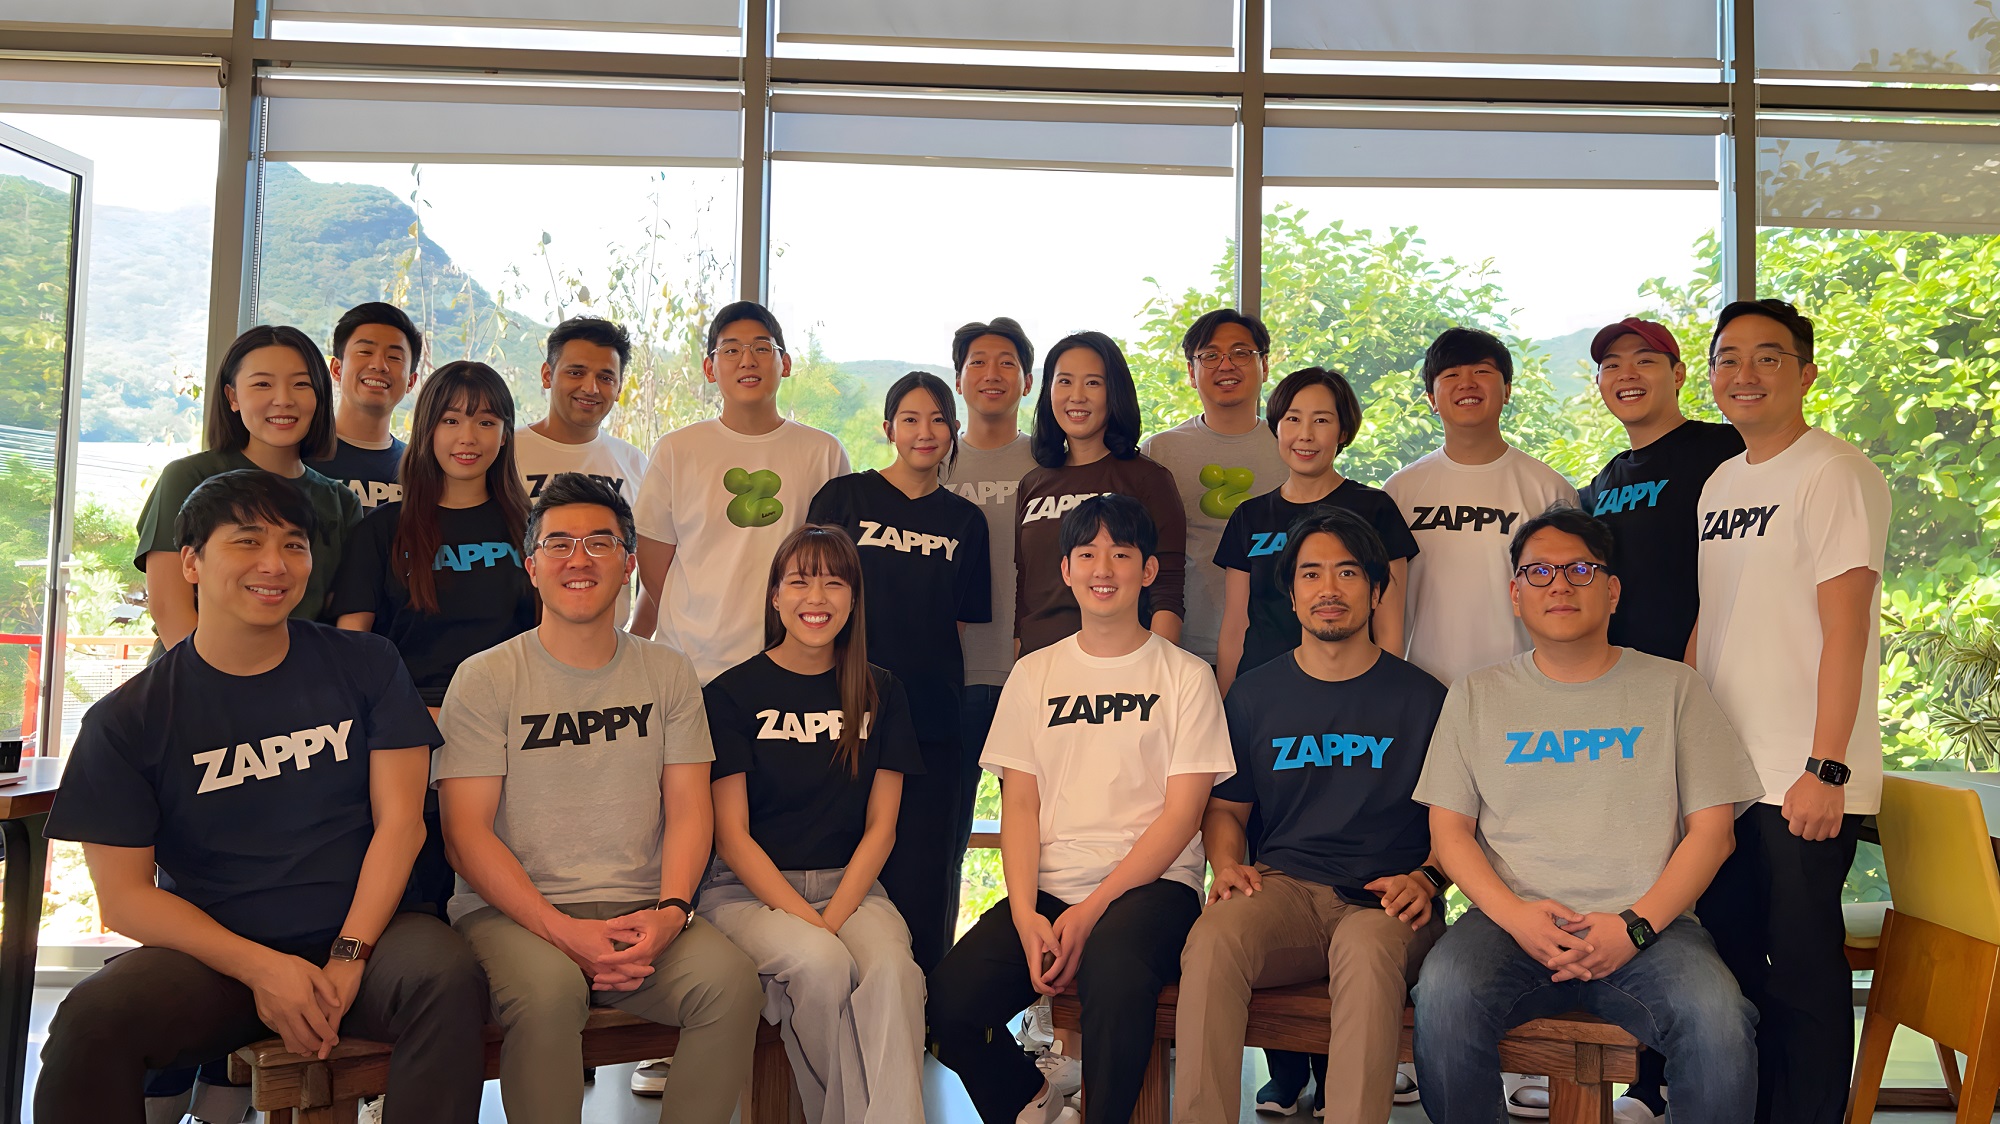 ‘ZAPPY’, an AI social app created by TWO Platforms, exceeds 250,000 users in 2 months